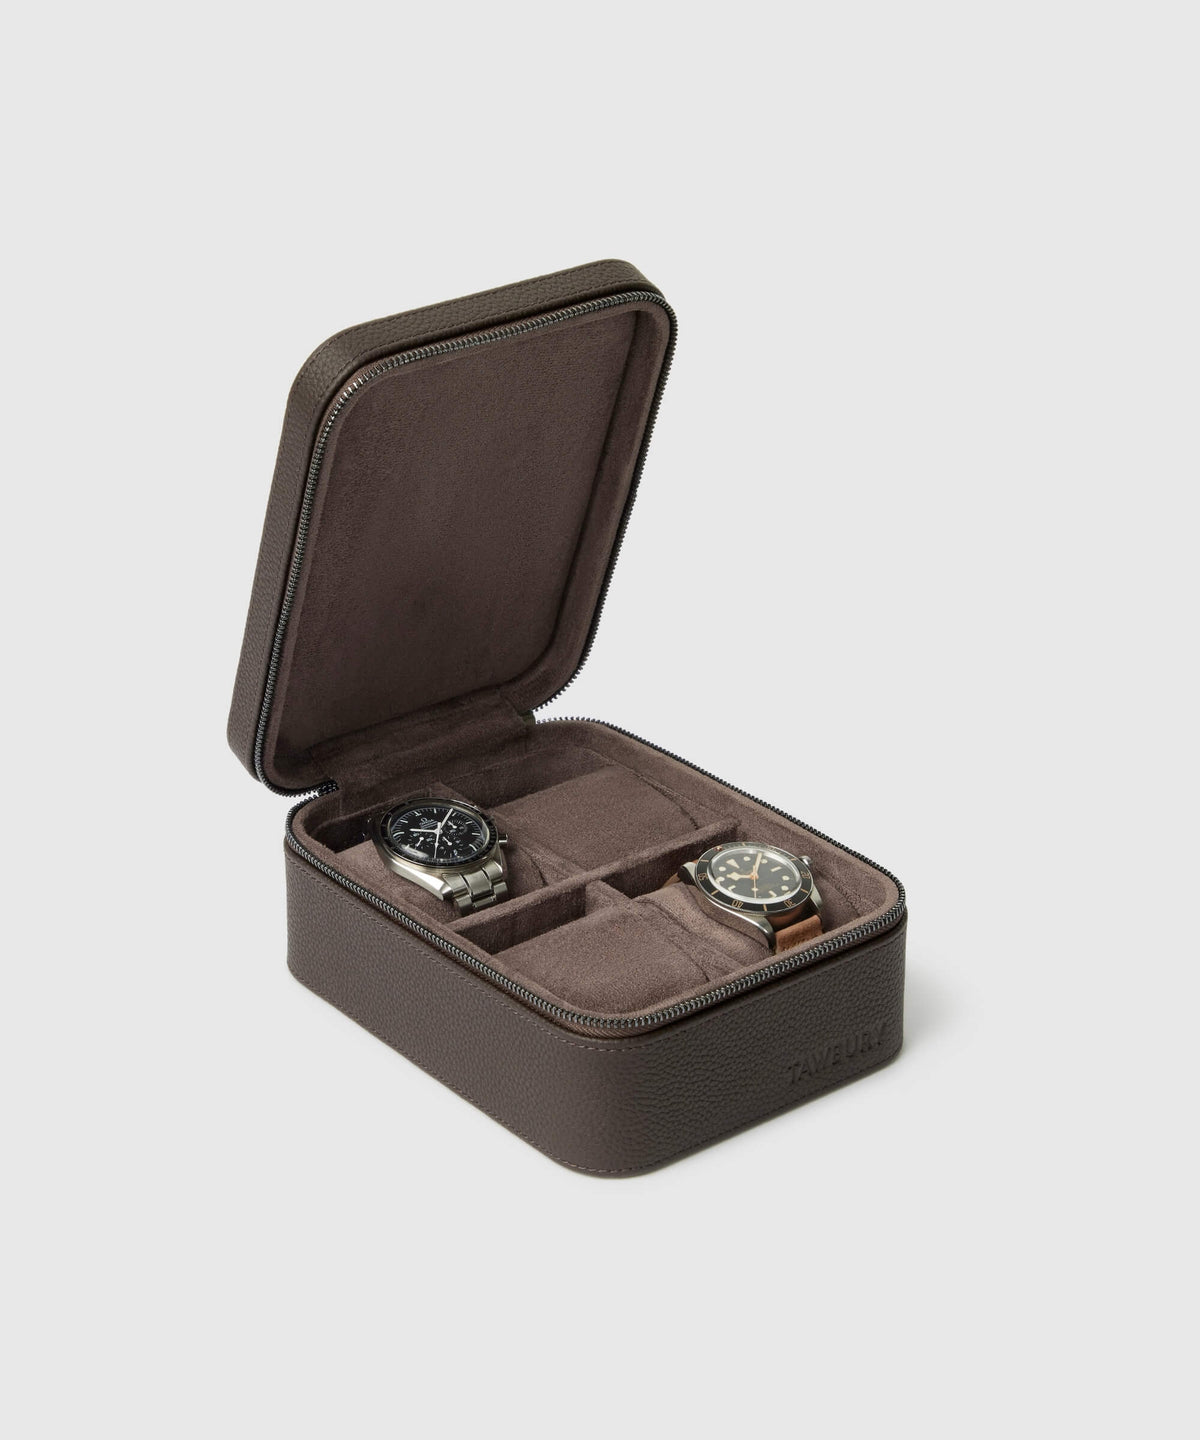 A Fraser 4 Watch Travel Case - Brown (Coming Soon) from the TAWBURY range with a zipper, open to reveal two watches inside, each in its own compartment.